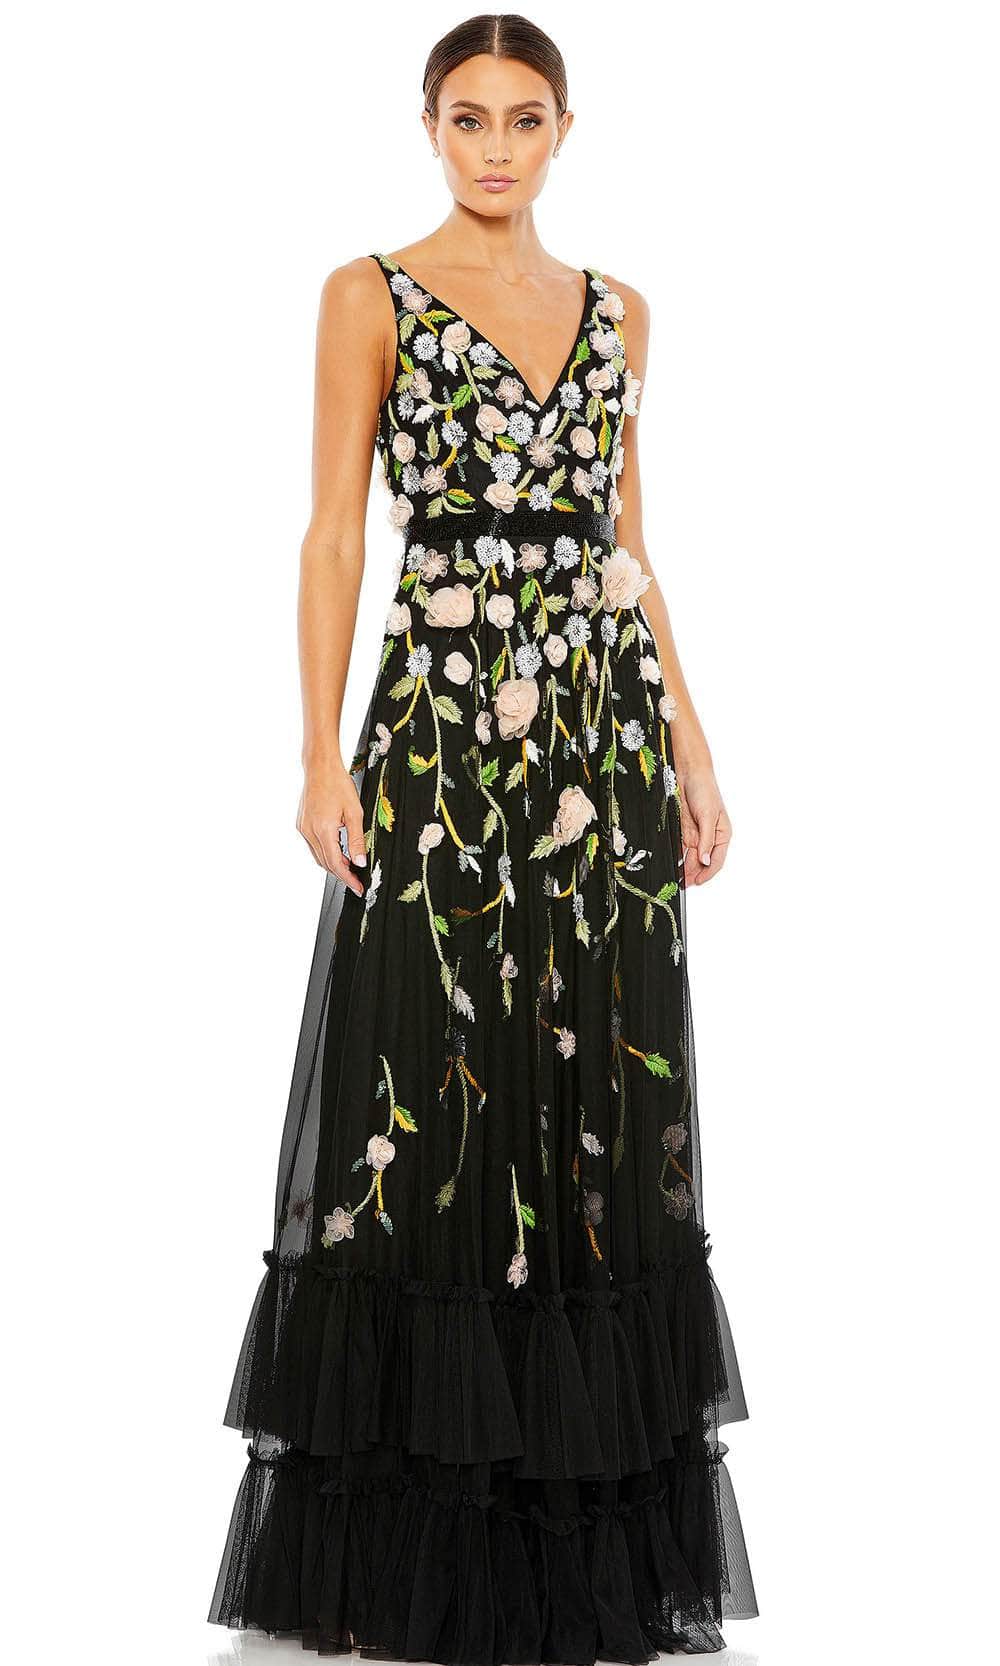 Mac Duggal 9171 - Floral Appliqued A-Line Evening Gown Special Occasion Dress 0 / Black Peach